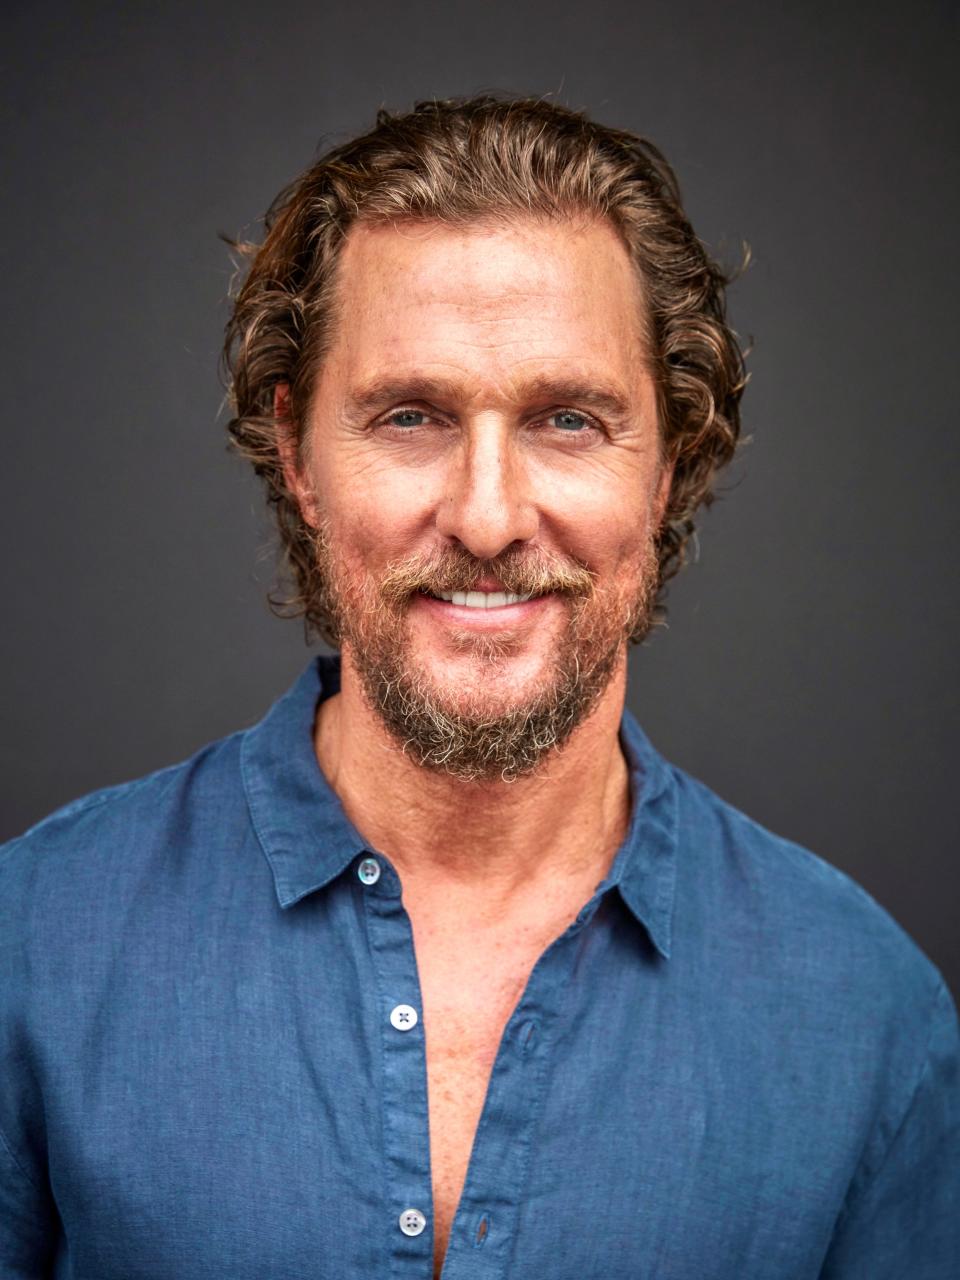 Matthew McConaughey's first children's book, "Just Because," will be released September 12.